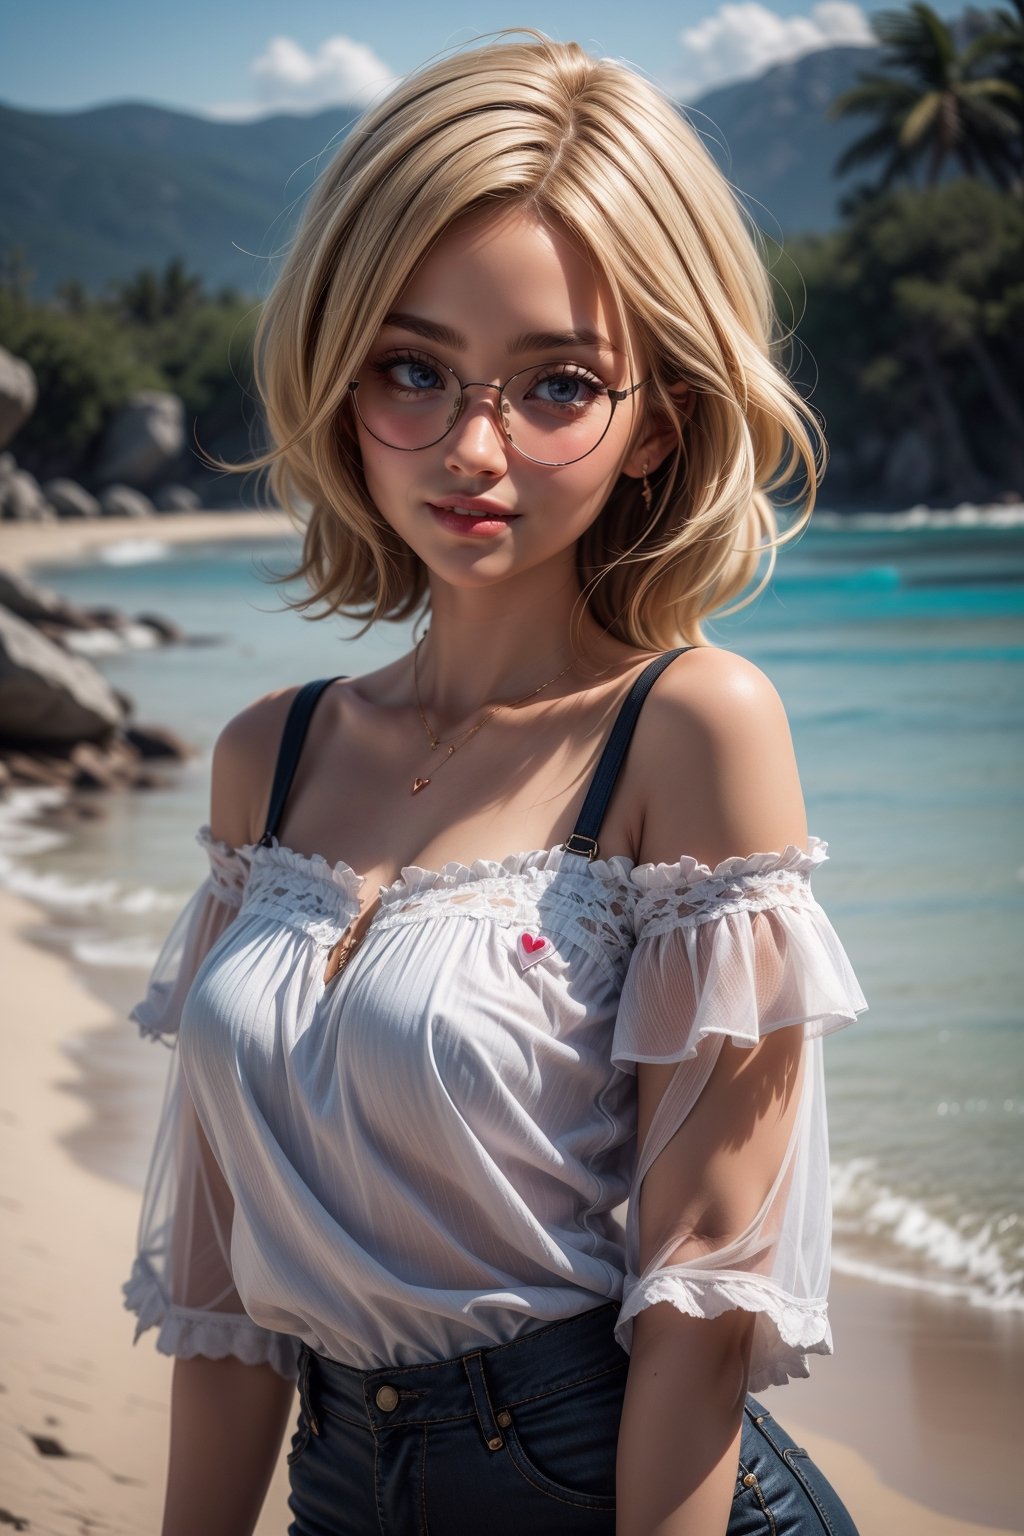 score_9, score_8_up, score_7_up, score_6_up, best quality, masterpiece, 4k, very aesthetic, (artist), highly detailed, perfect anatomy, cinematic light, very cute, (1girl), pretty girl, wearing glasses, megane, short wavy blonde hair, wearing glasses, megane, blue eyes, off-shoulder blouse, blush, breast, young, heart, grinning to viewer, beach background